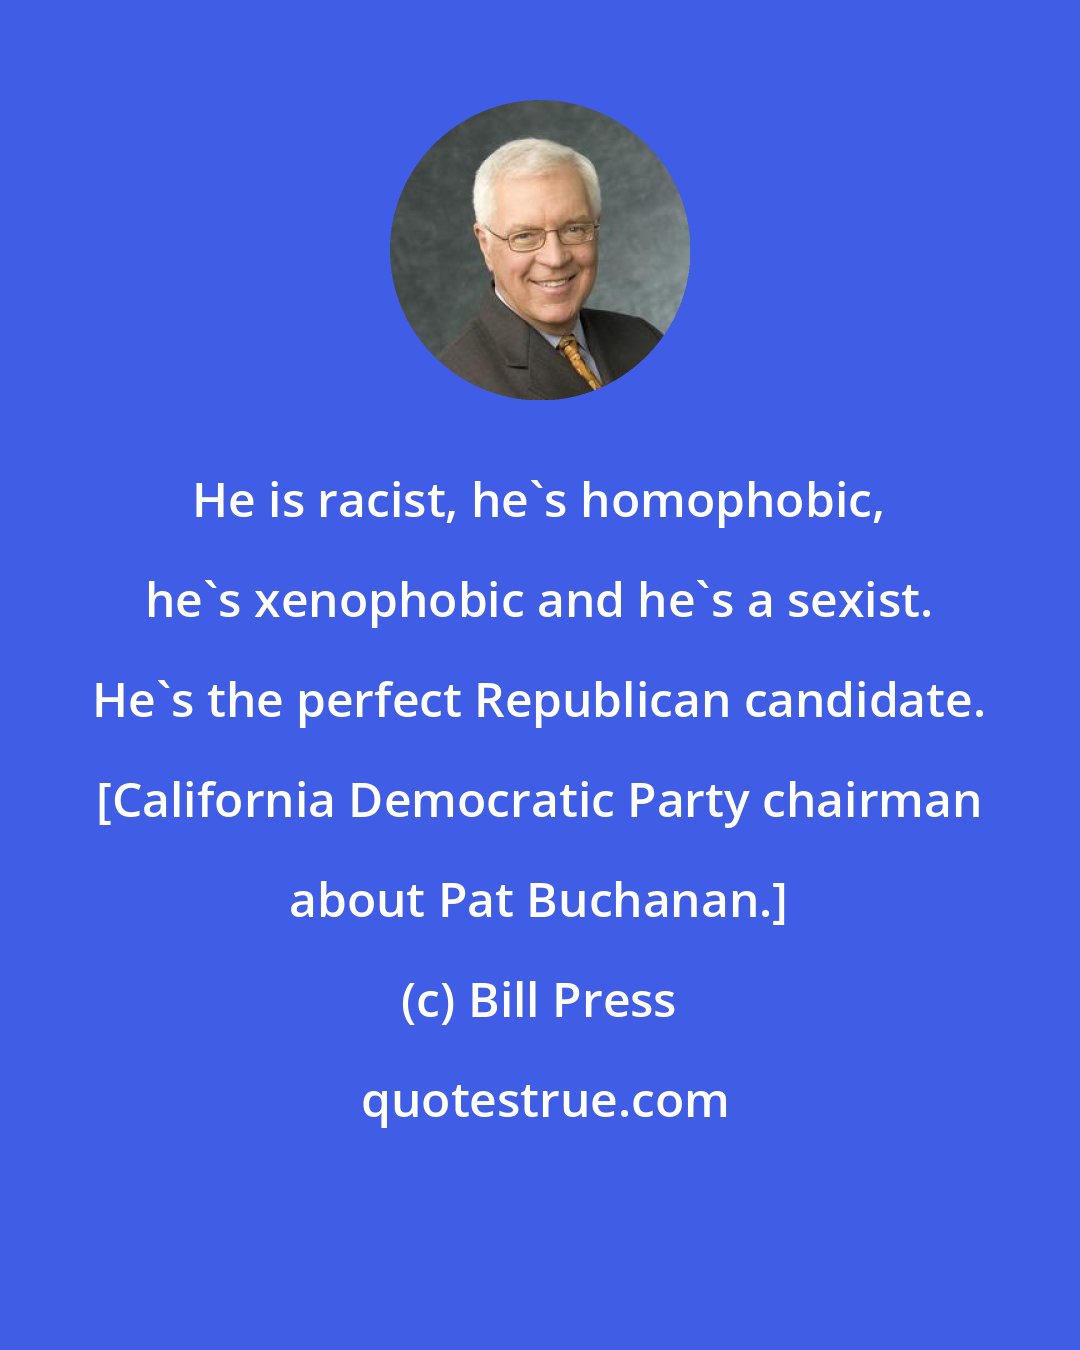 Bill Press: He is racist, he's homophobic, he's xenophobic and he's a sexist. He's the perfect Republican candidate. [California Democratic Party chairman about Pat Buchanan.]